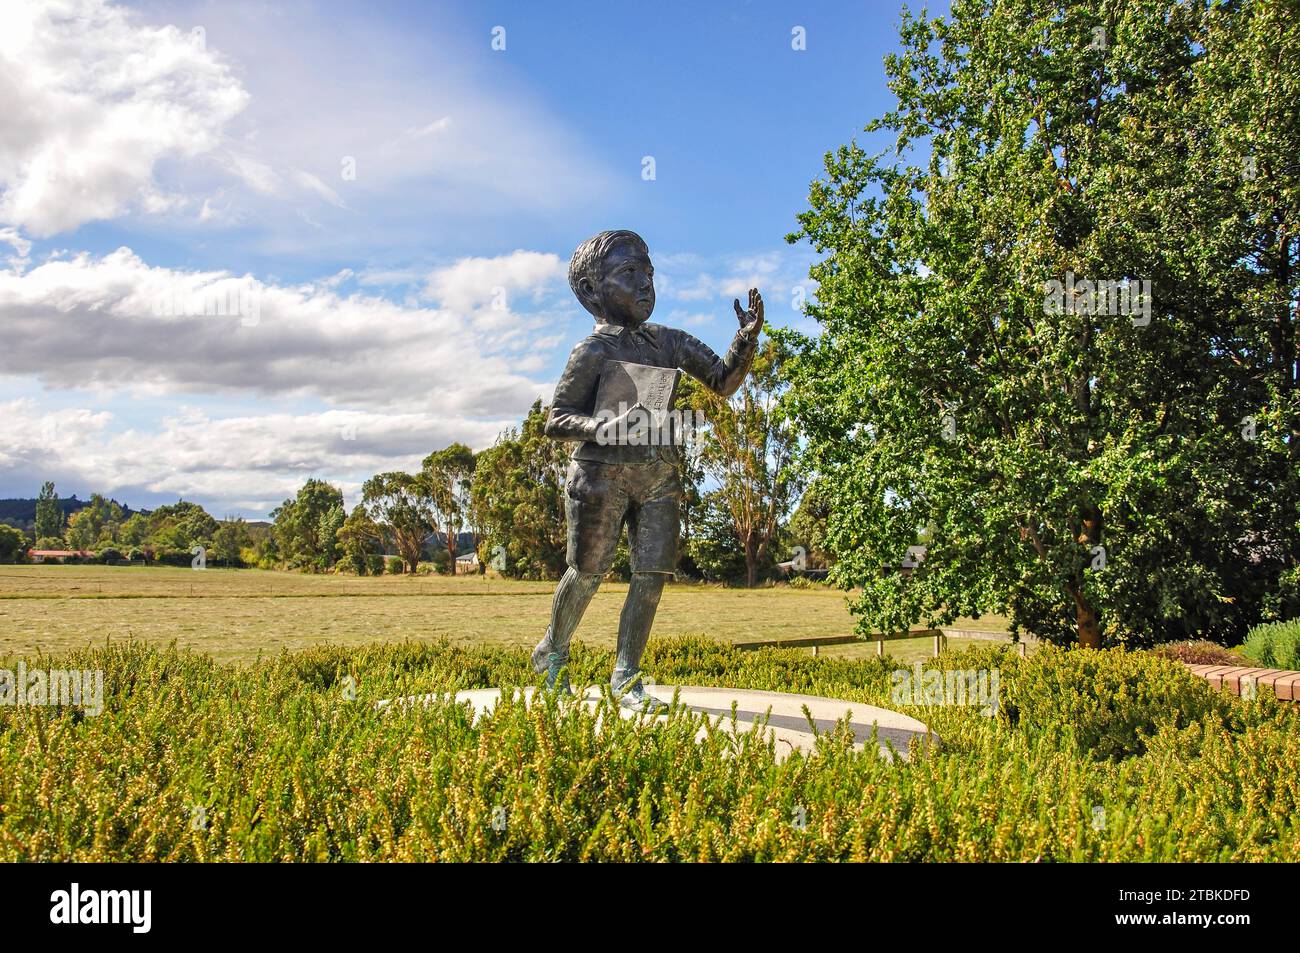 Statue of Ernest Rutherford (New Zealand physicist) at Birthplace Memorial, Brightwater, near Nelson, Tasman Region, South Island, New Zealand Stock Photo